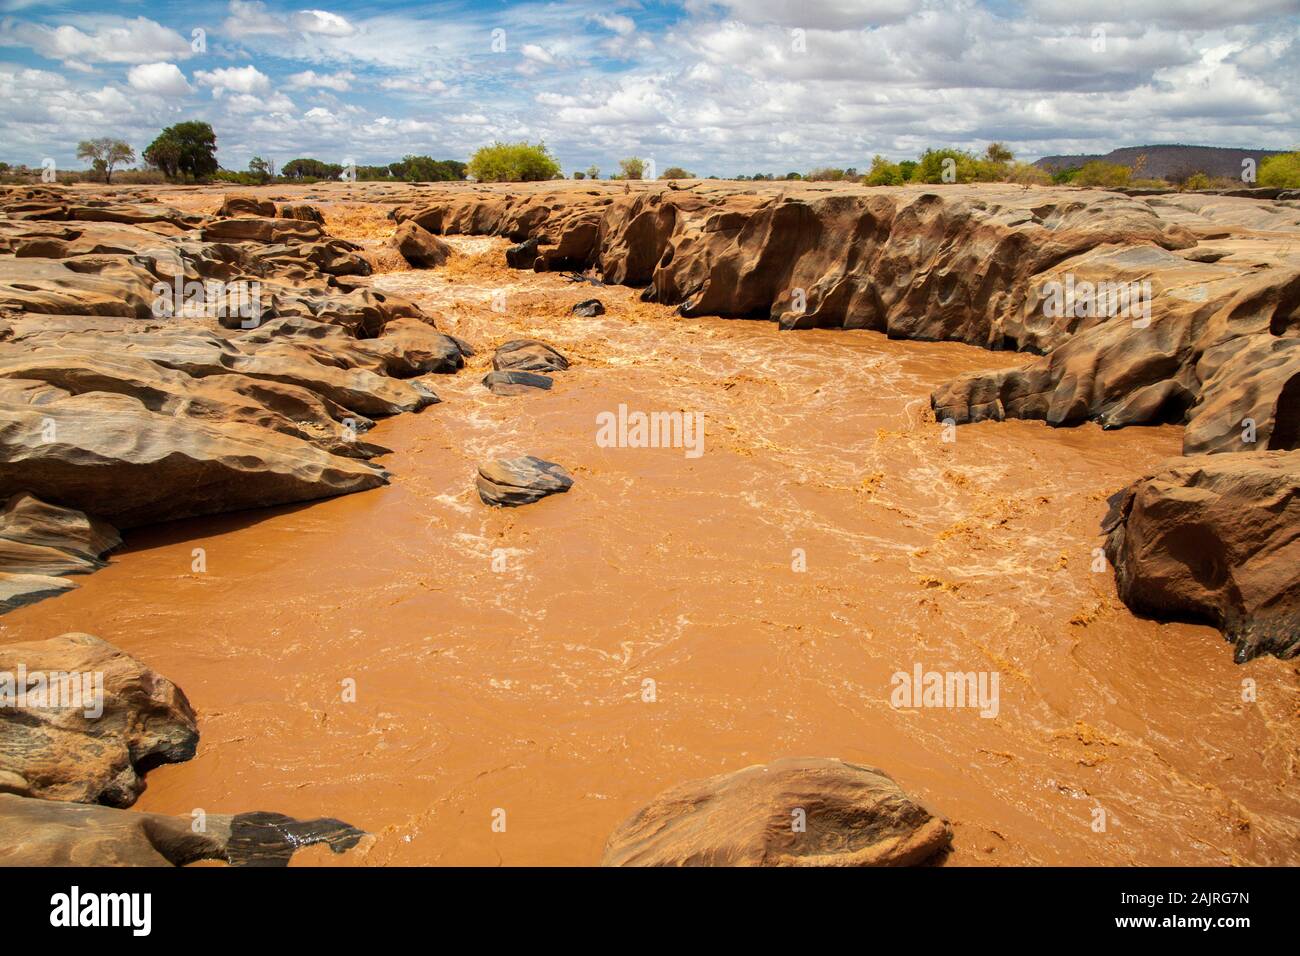 Galana river in Kenya, blue sky with clouds Stock Photo